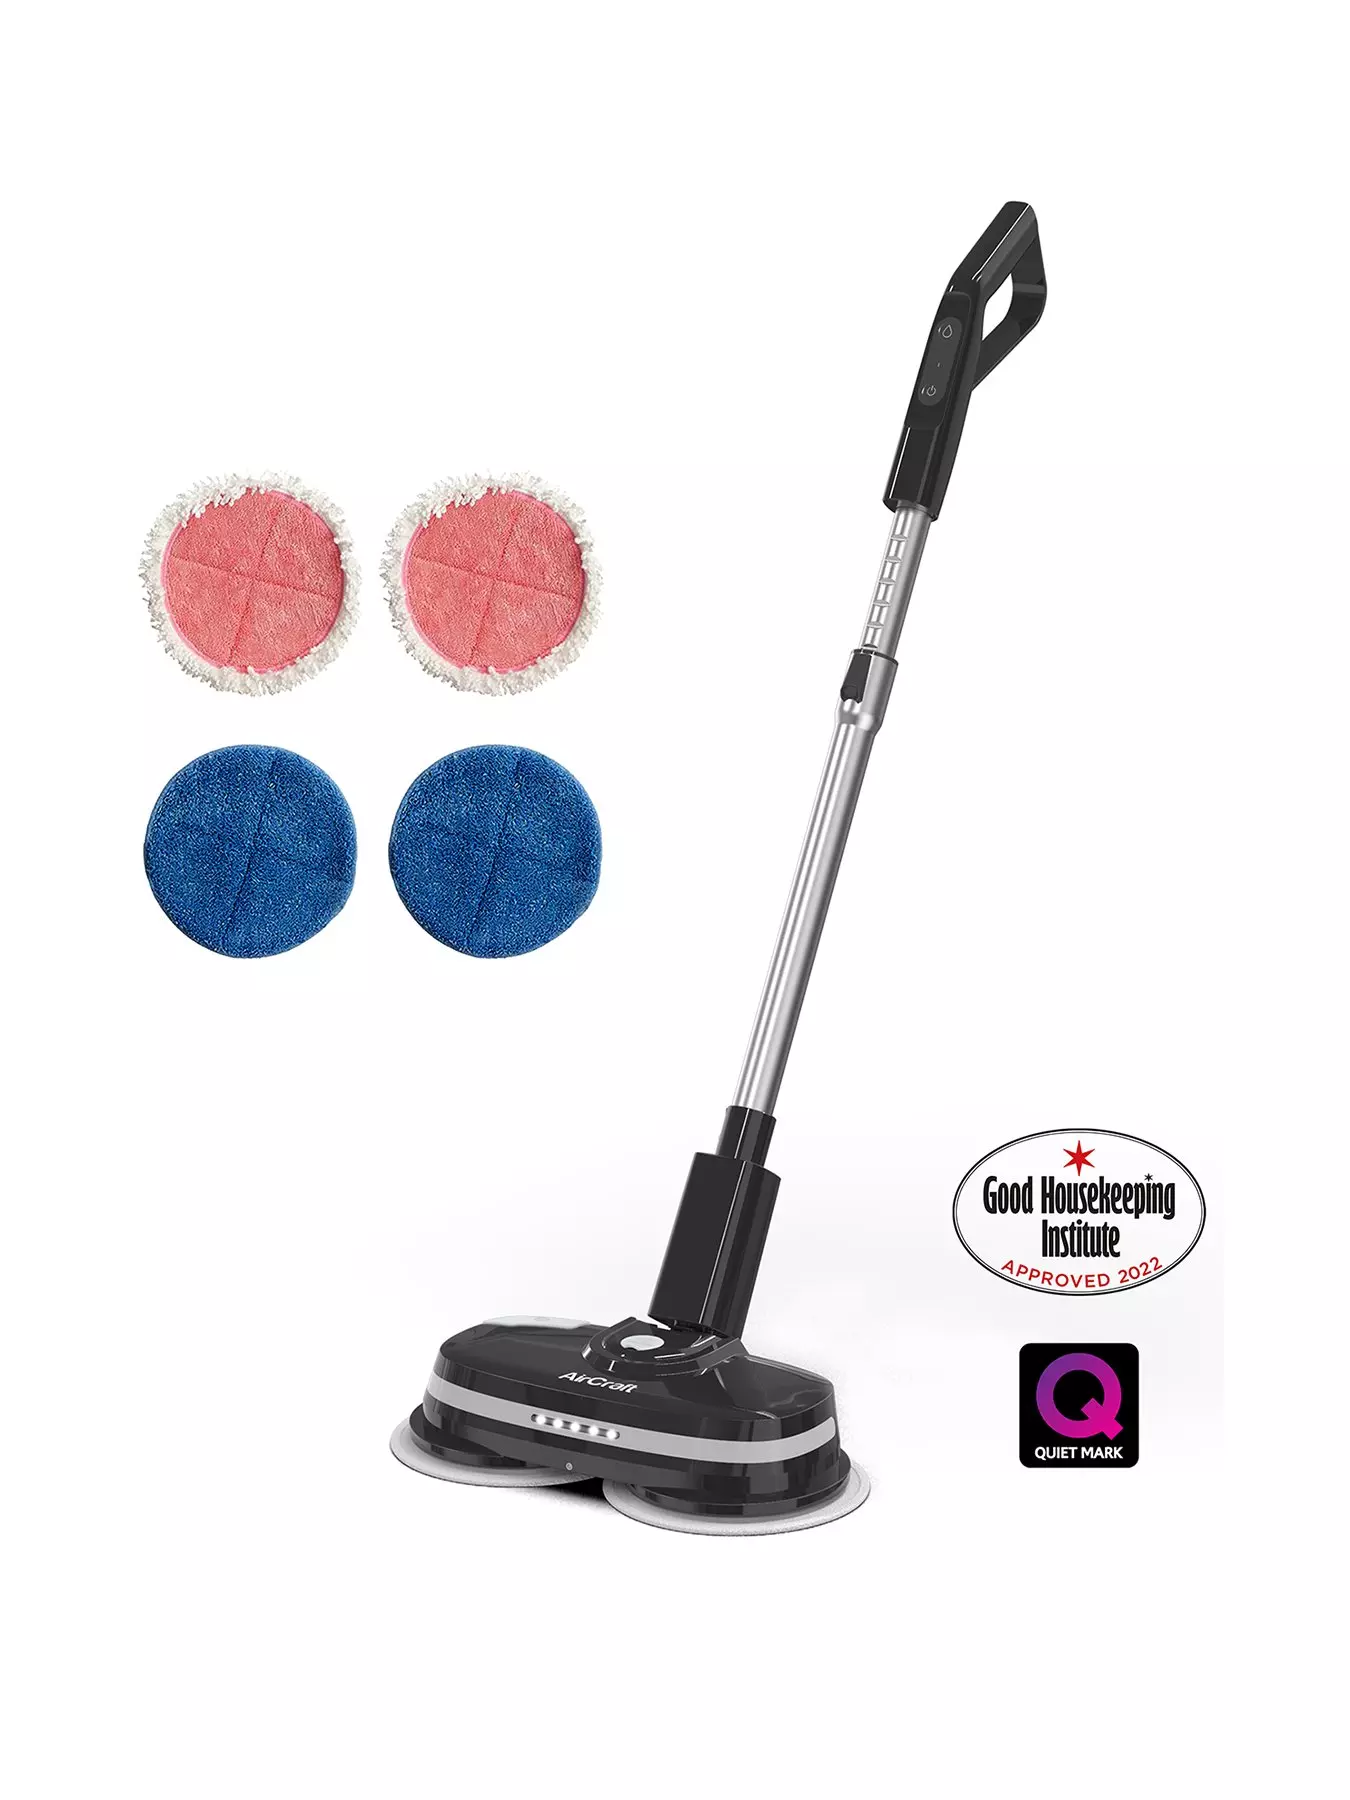 https://media.very.co.uk/i/very/QHFHG_SQ1_0000000088_NO_COLOR_SLf/aircraft-powerglide-cordless-hard-floor-cleaner-cleaning-and-buffering-around-20-square-metres-per-minute.jpg?$180x240_retinamobilex2$&$roundel_very$&p1_img=quiet_mark&fmt=webp